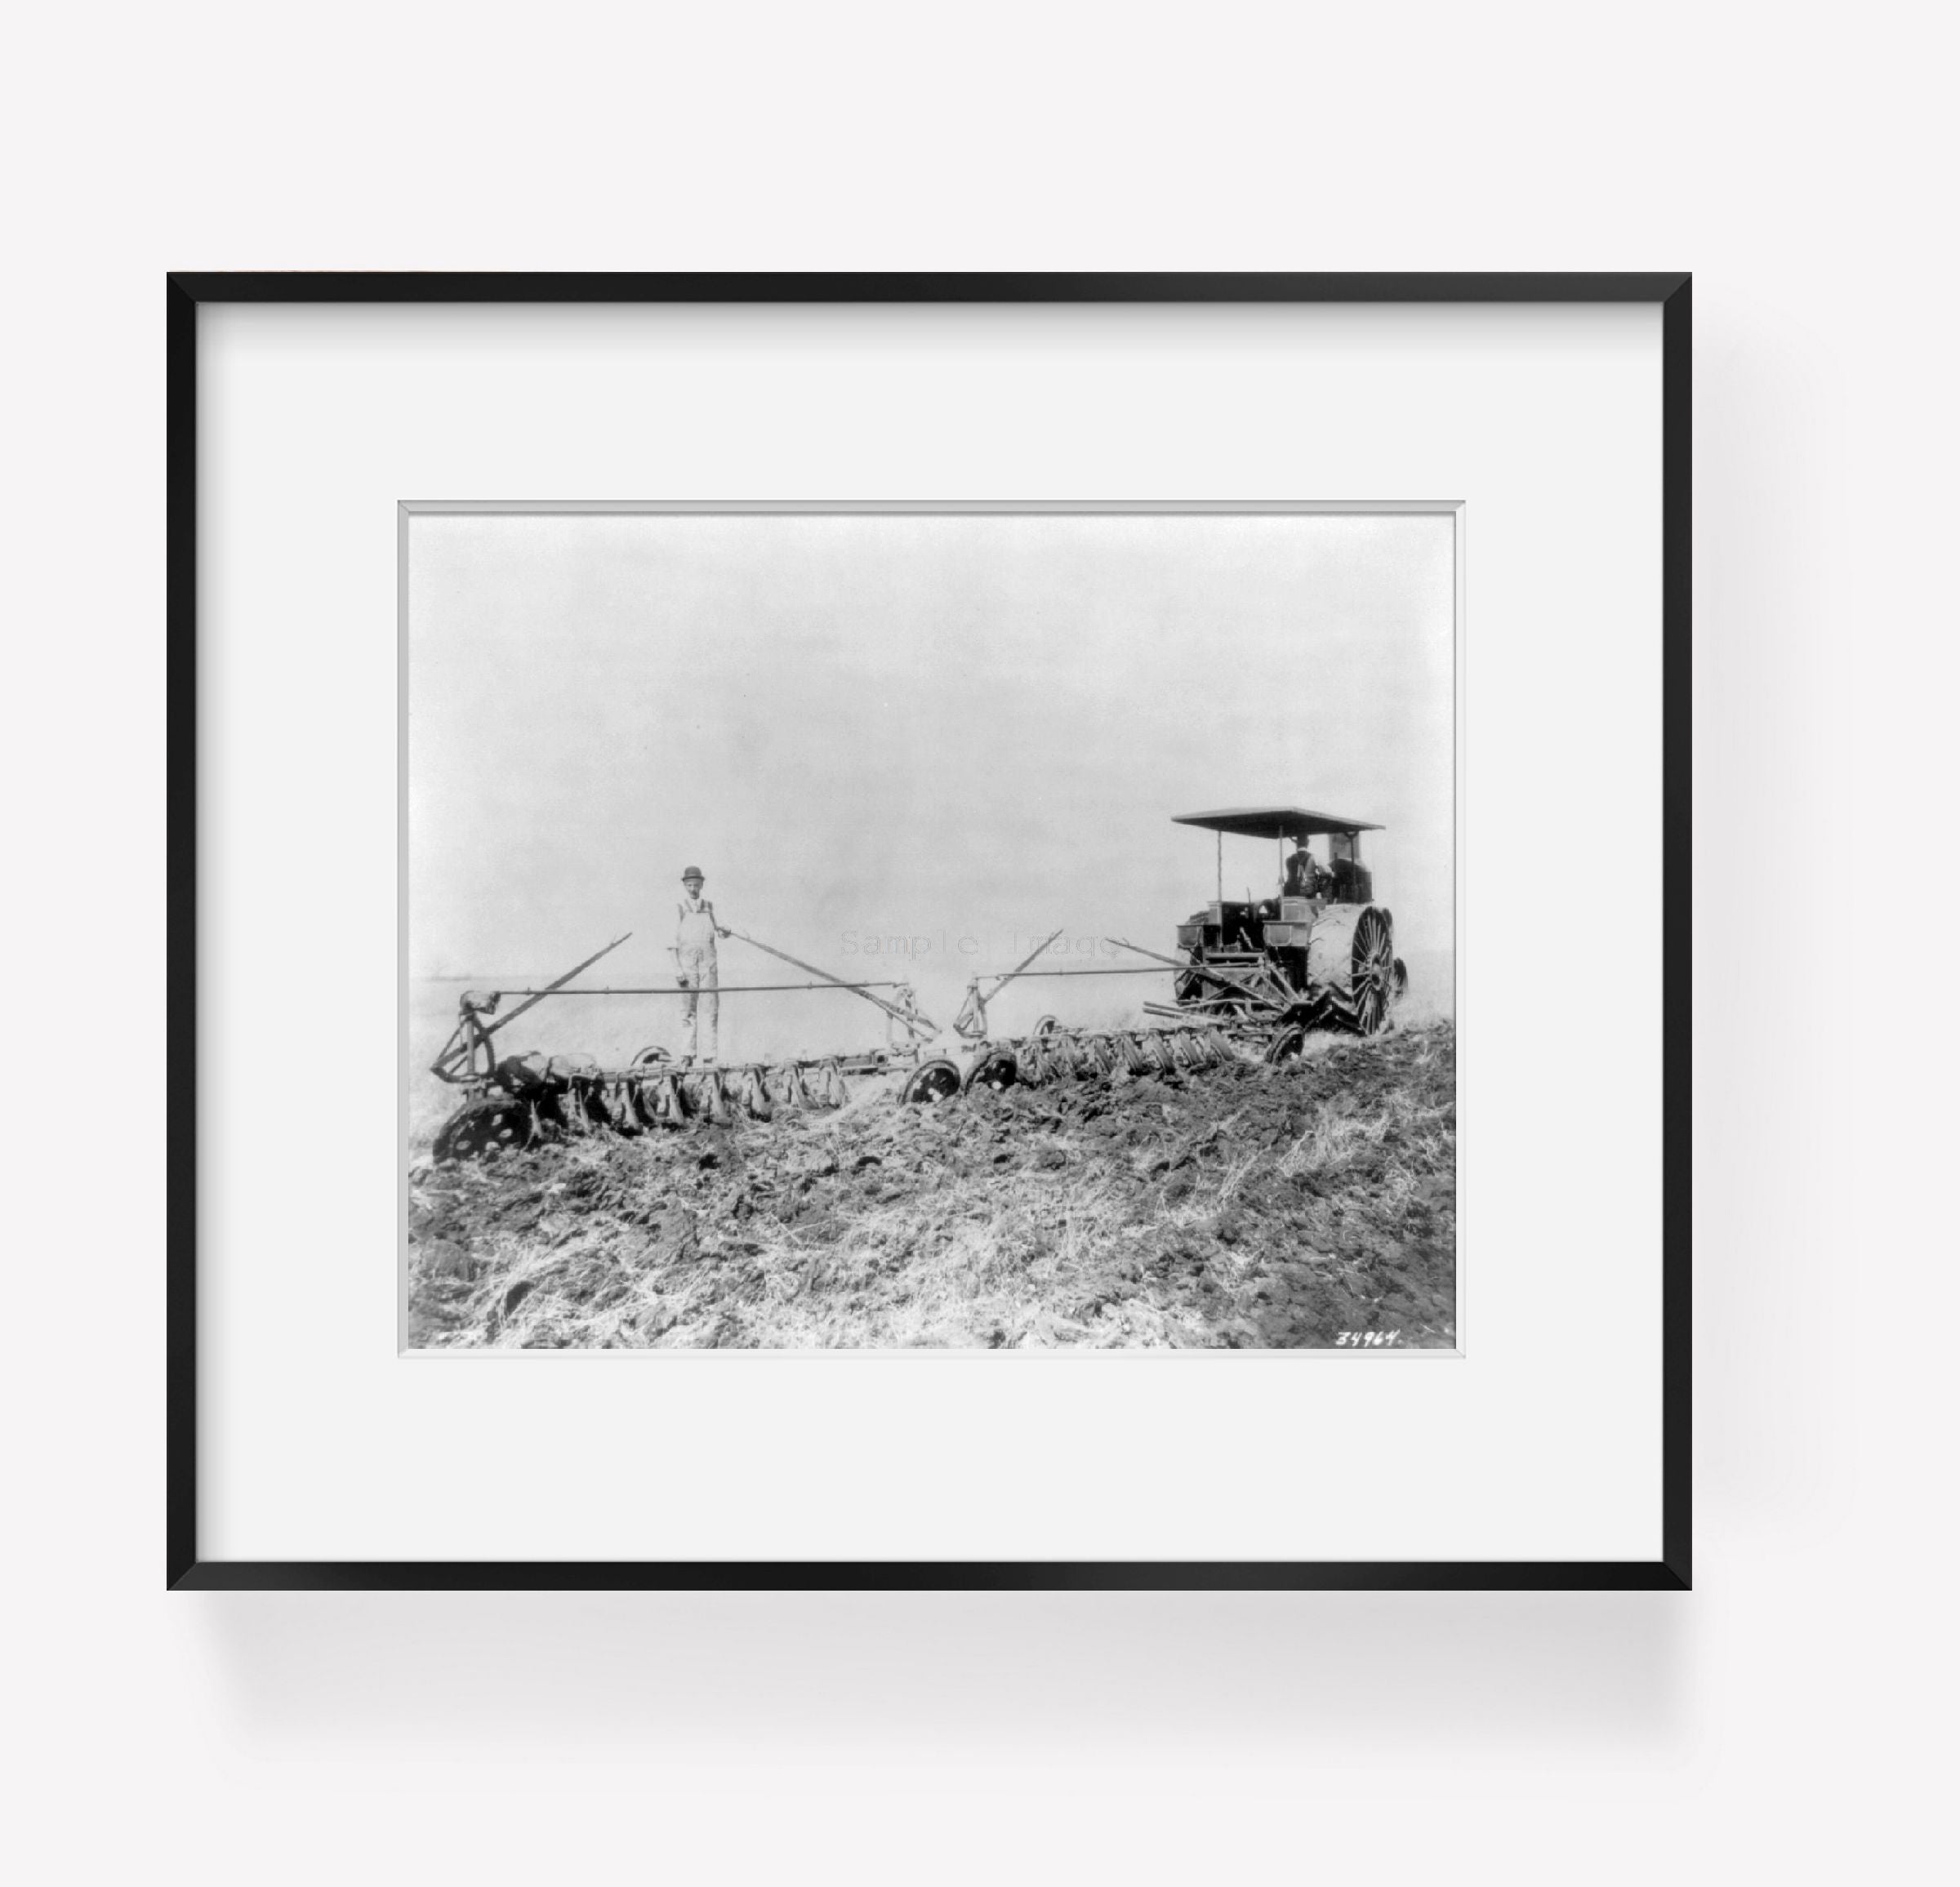 ca. 1900 photograph of Tractor pulling large set of discs across field